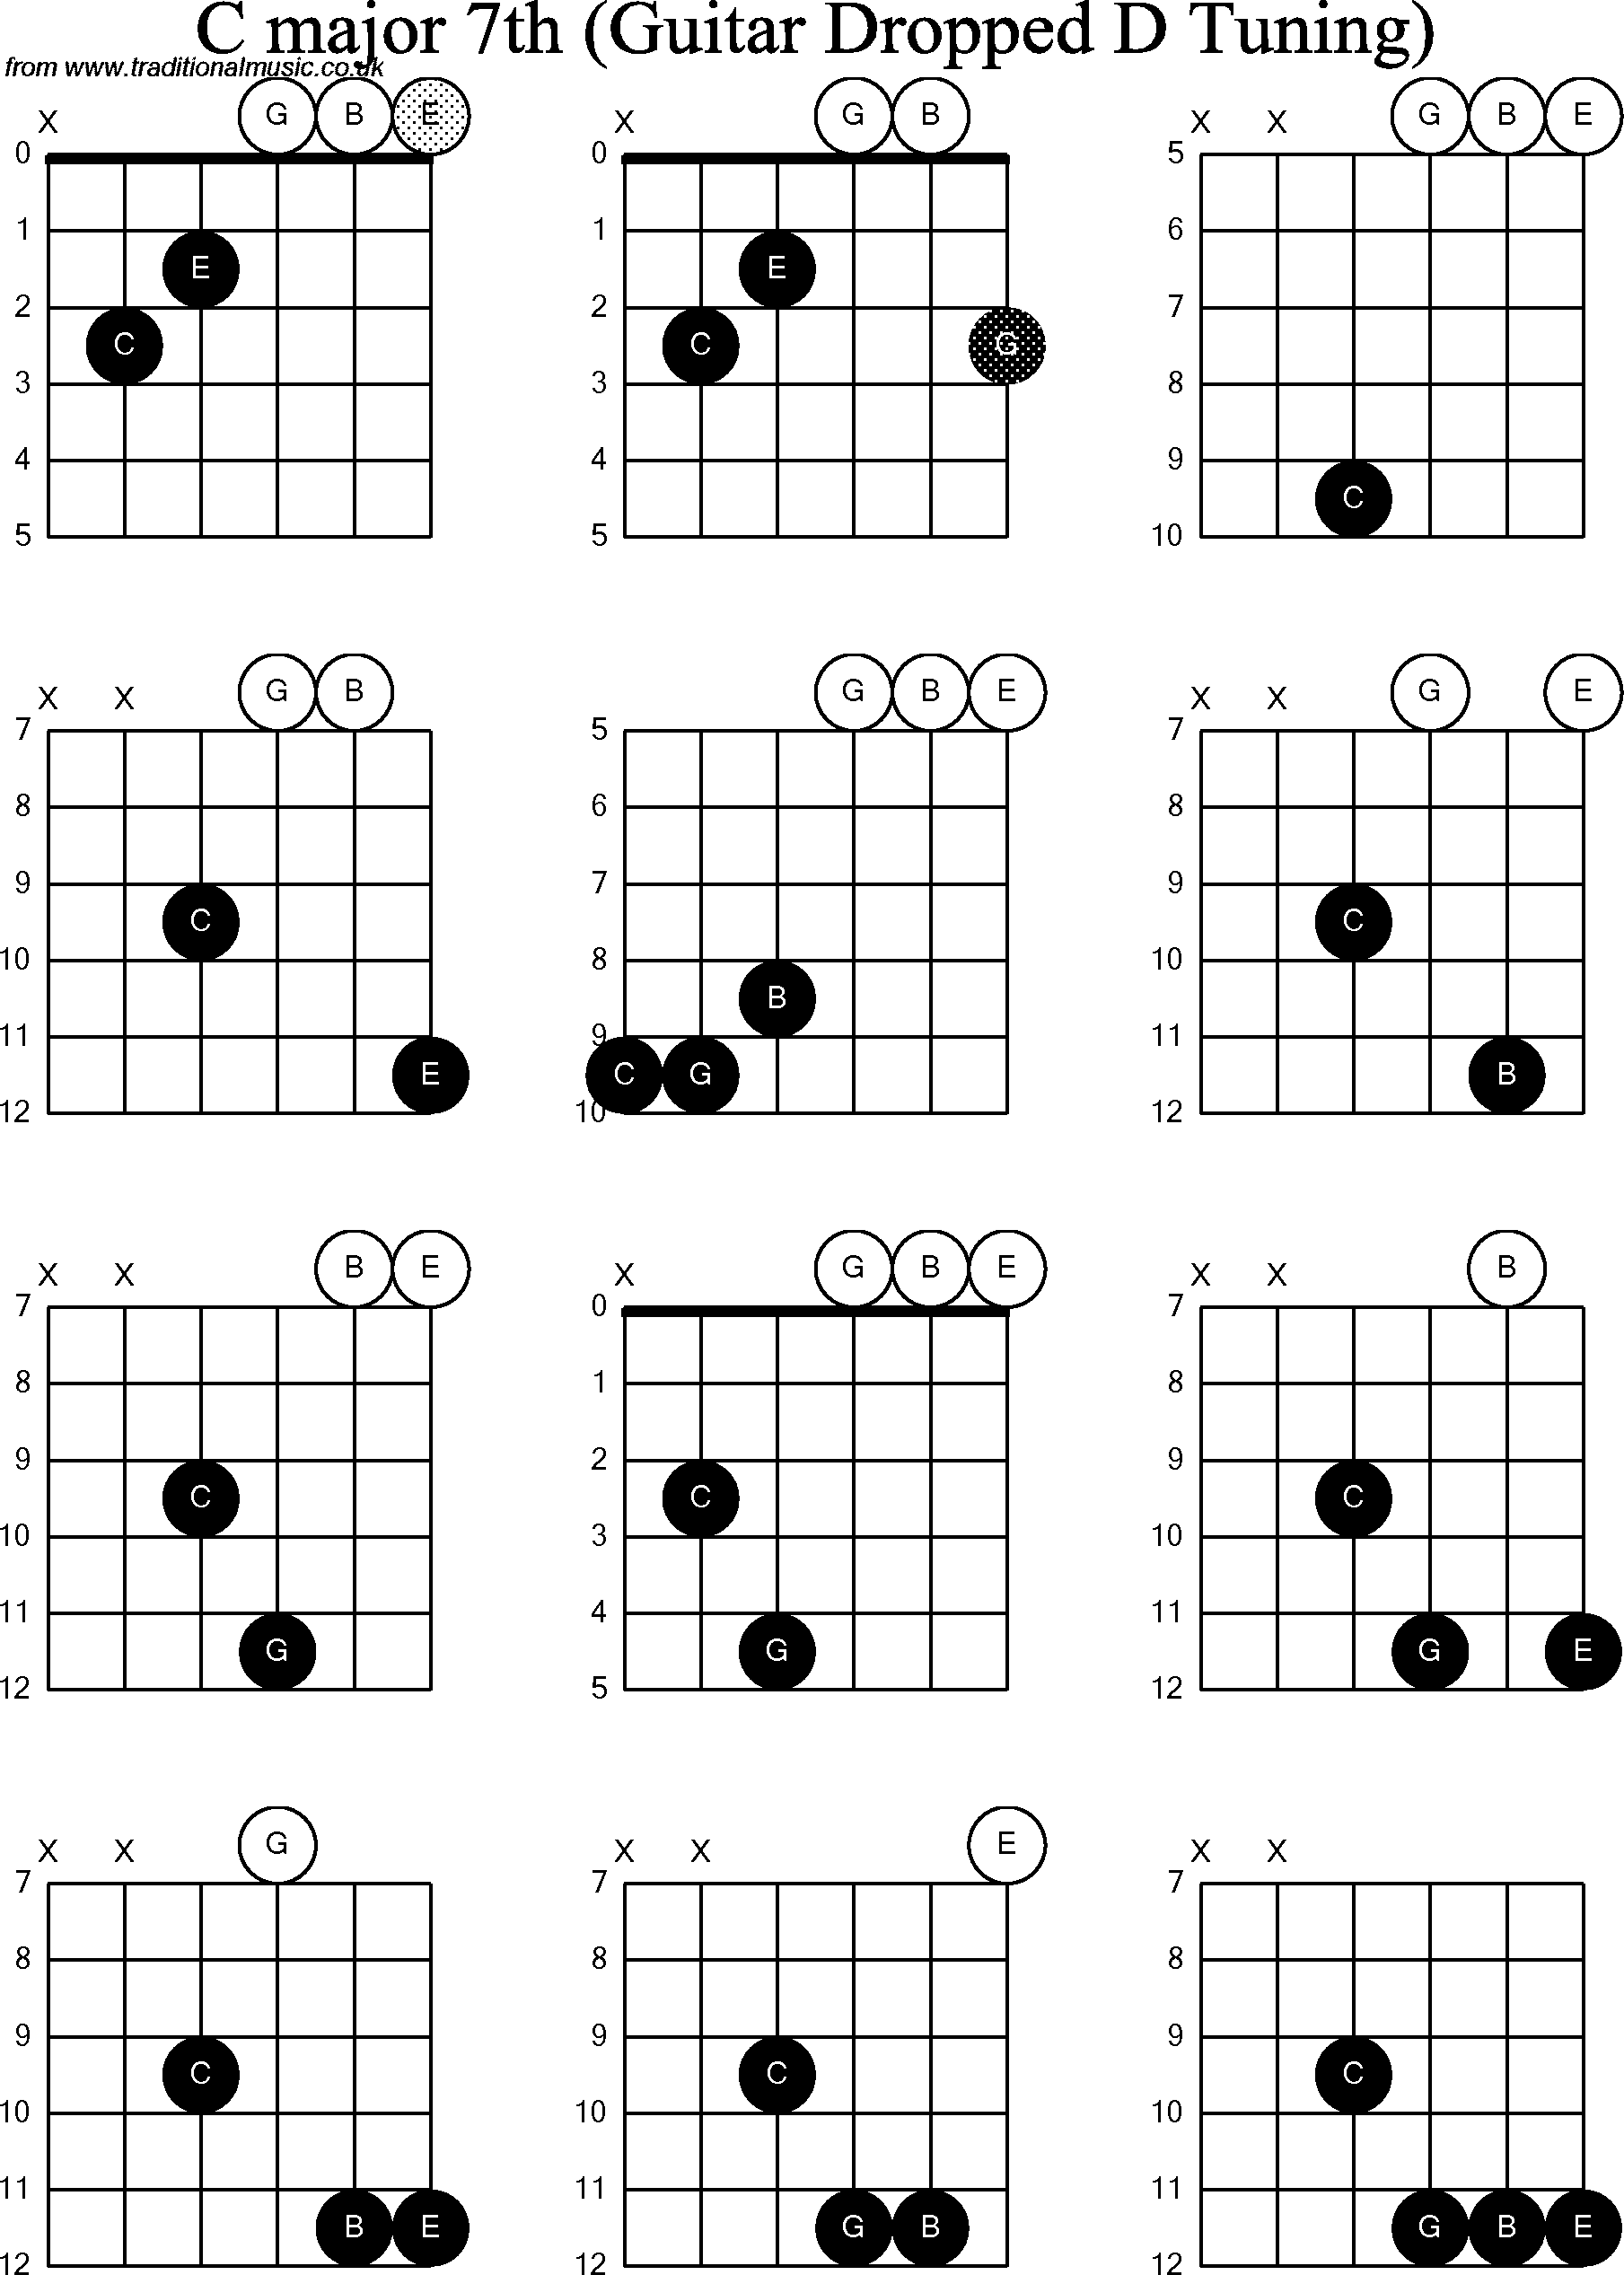 Chord diagrams for dropped D Guitar(DADGBE), C Major7th